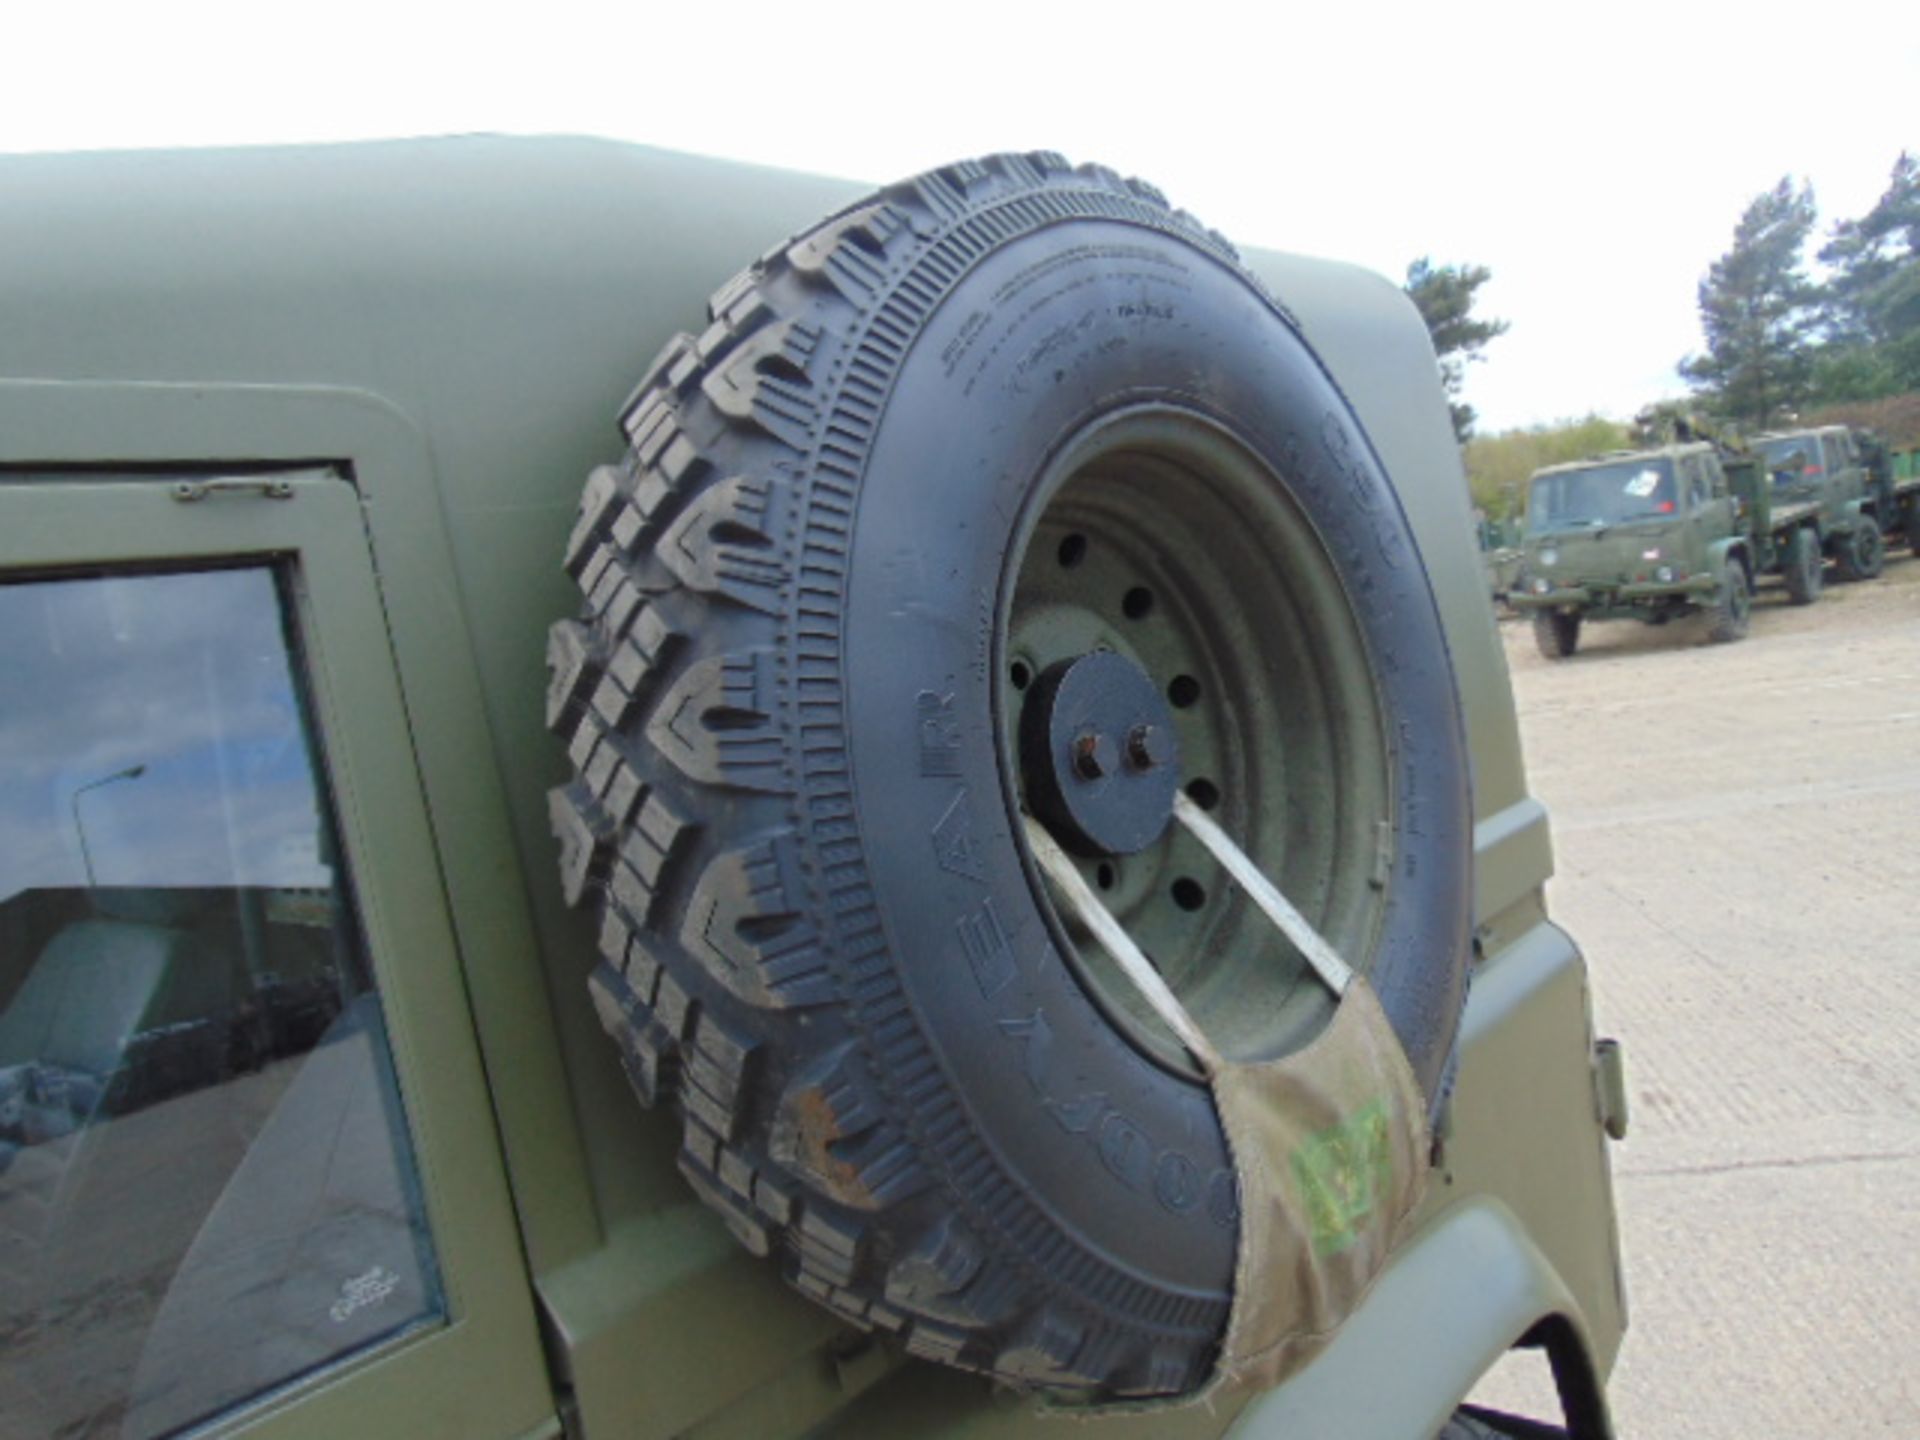 Military Specification Land Rover Wolf 90 Hard Top - Image 21 of 22